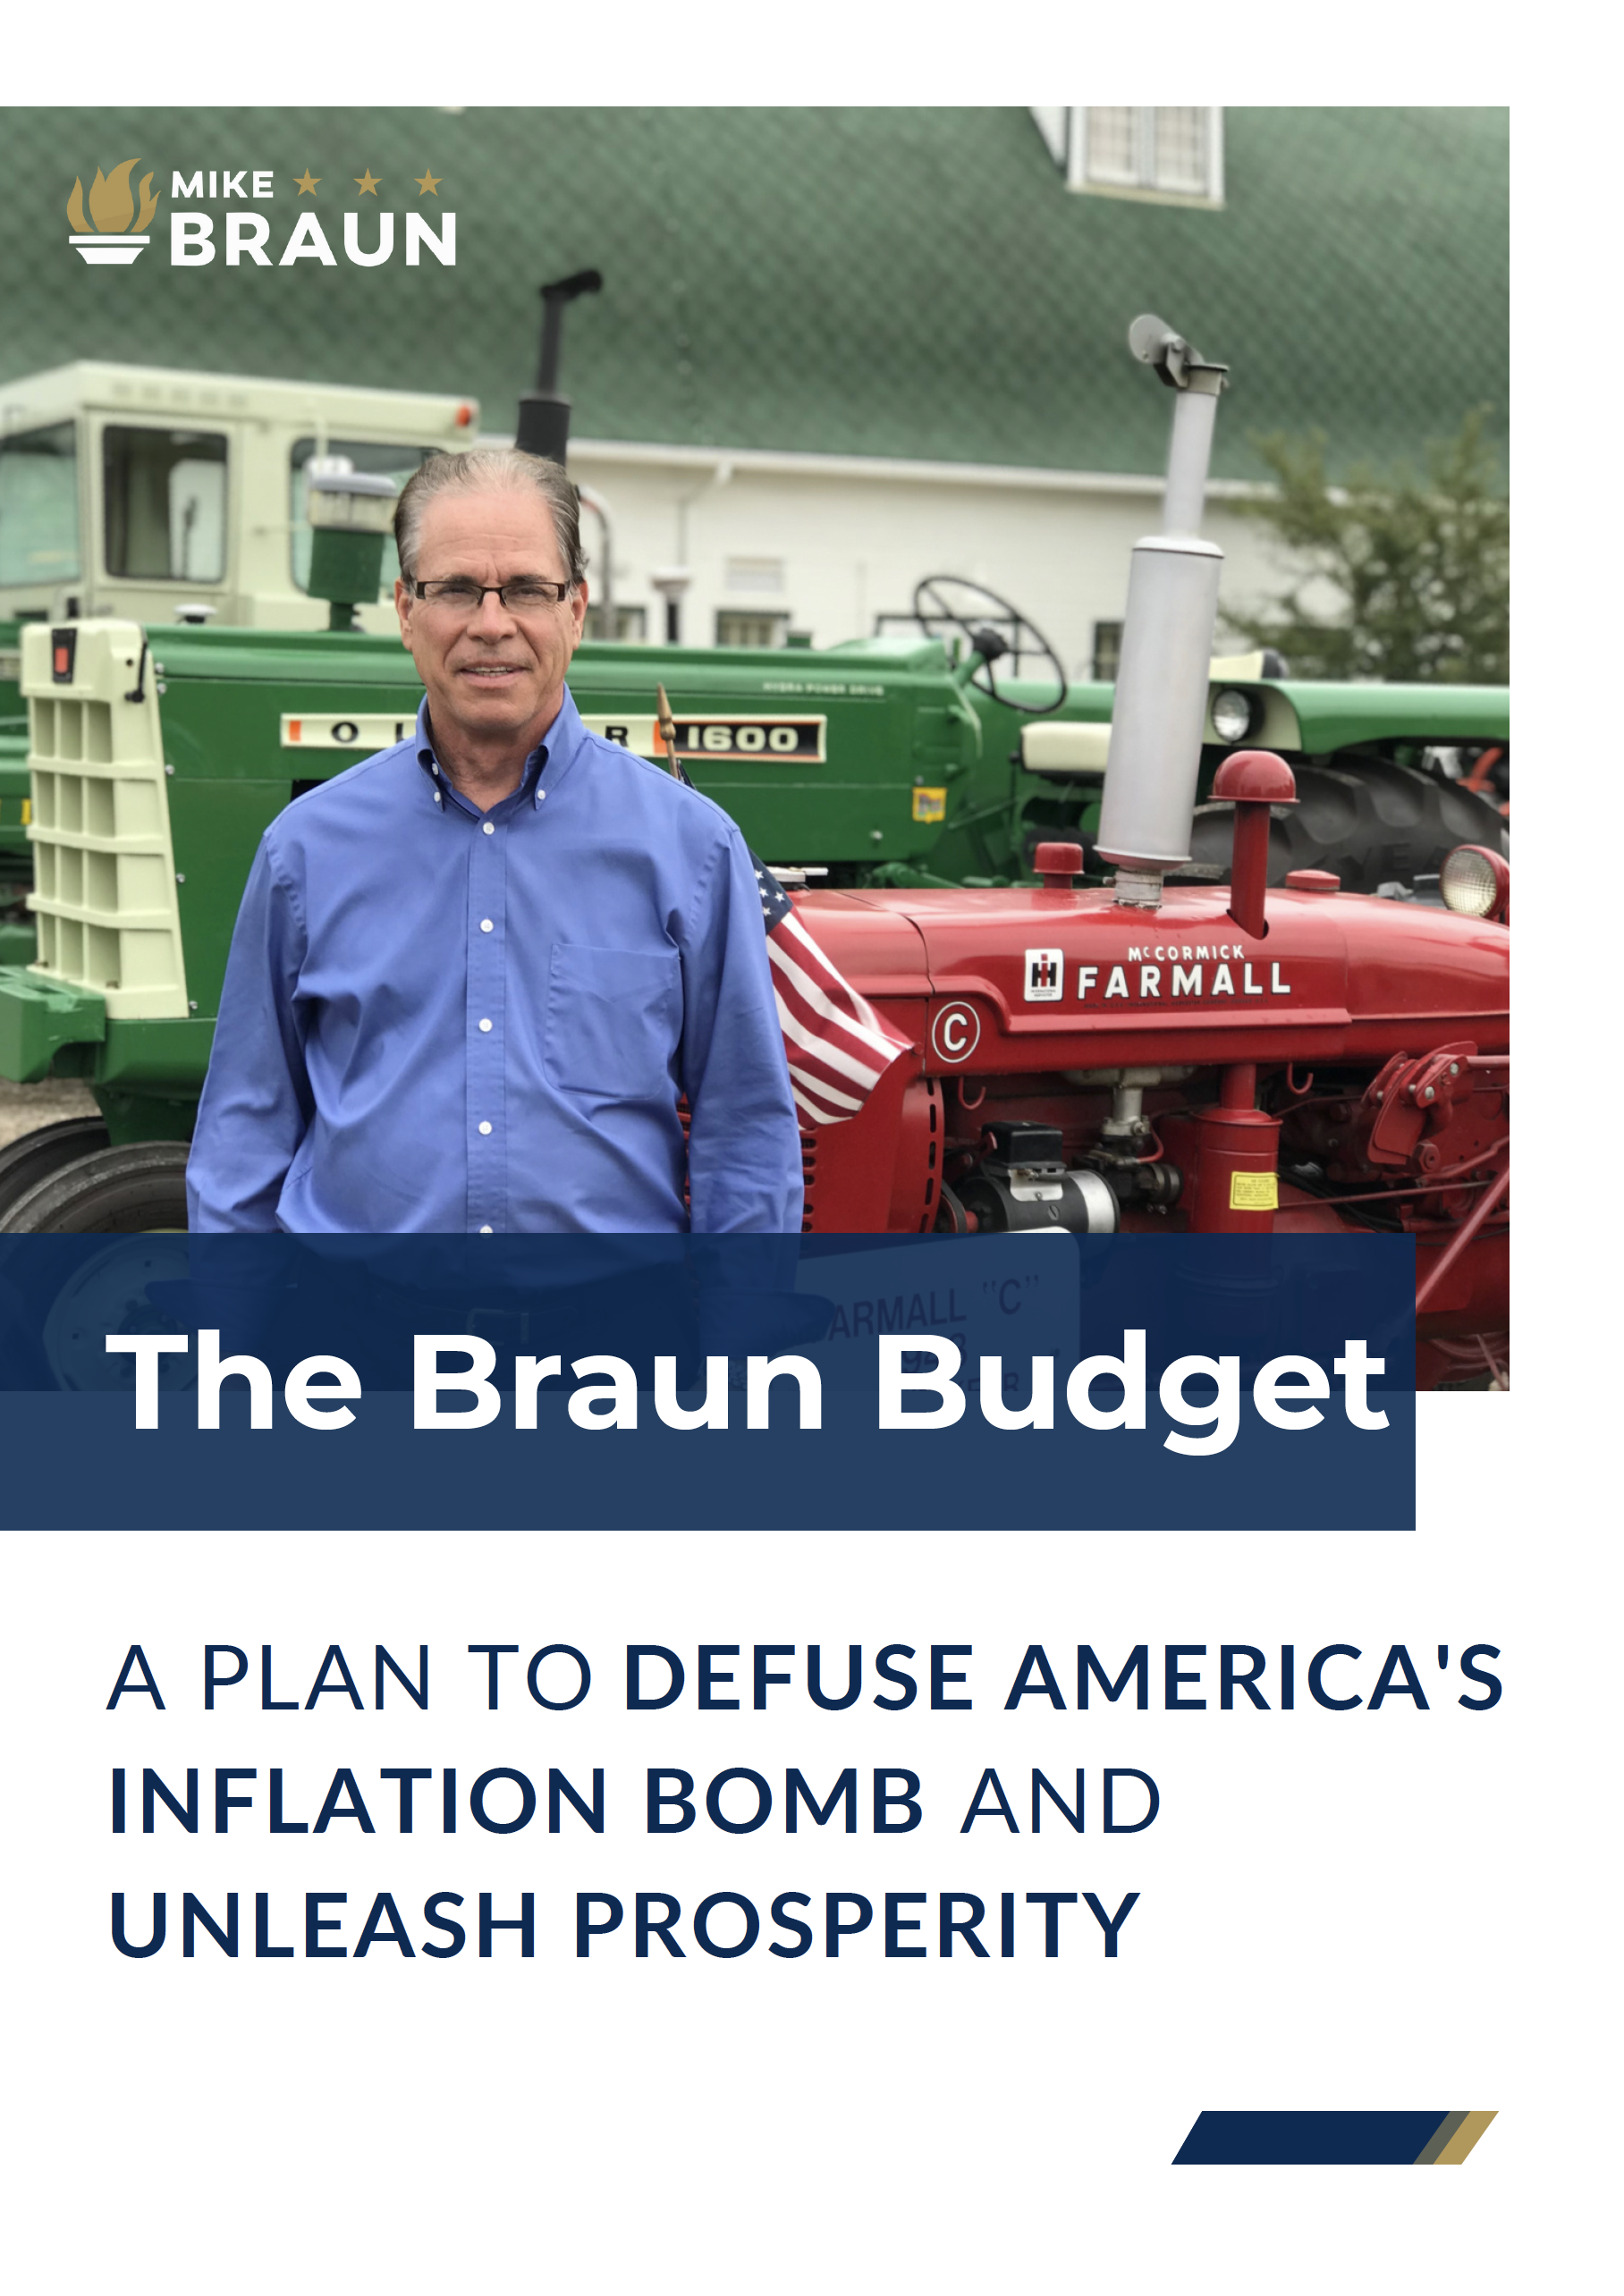 The Braun Budget Guide